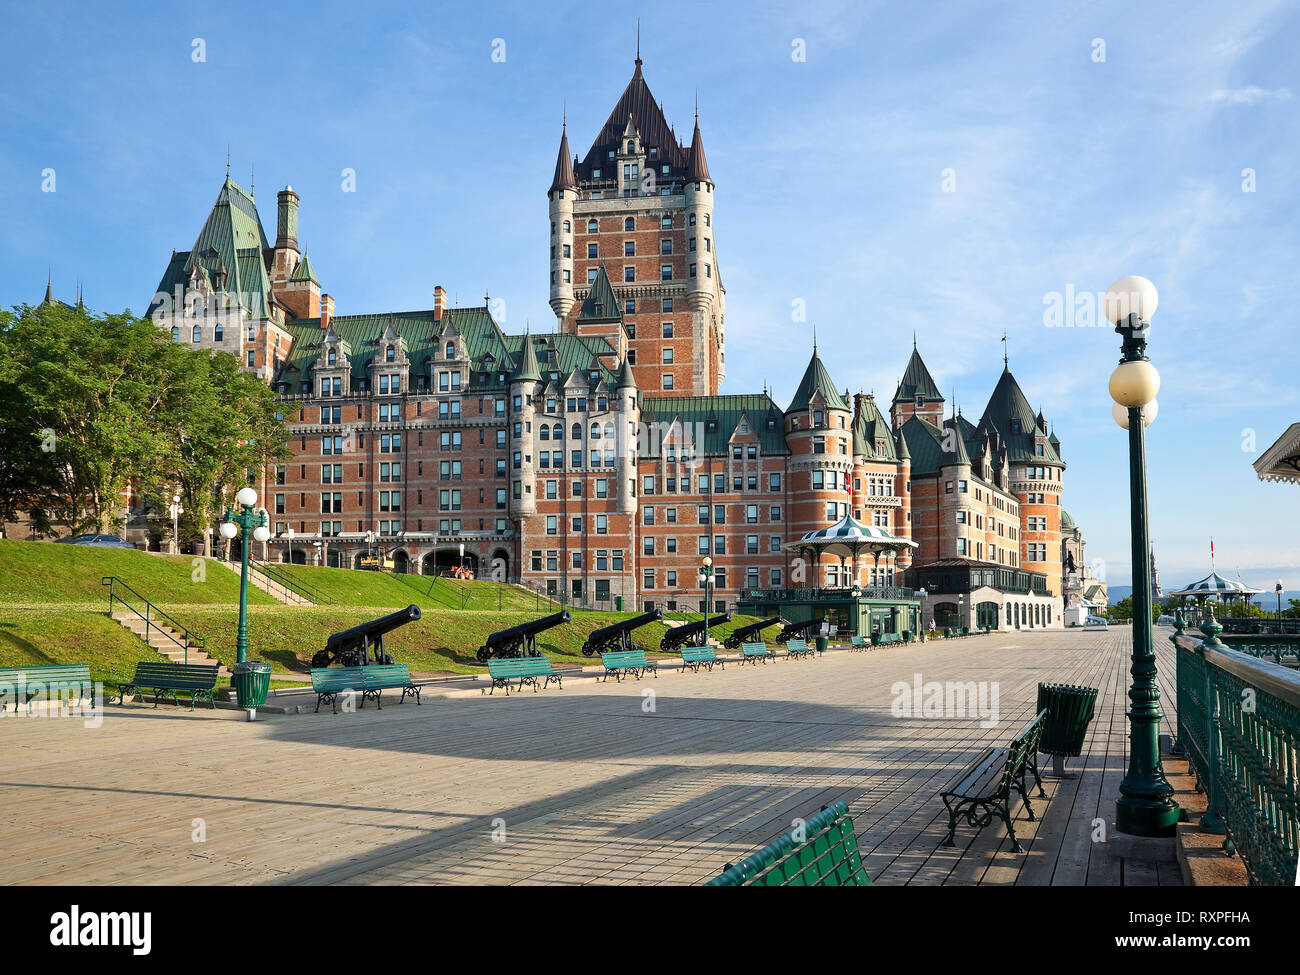 Chateau Frontenac and Dufferin Terrace in the early morning light, Old Quebec City, Province of Quebec, Canada Stock Photo